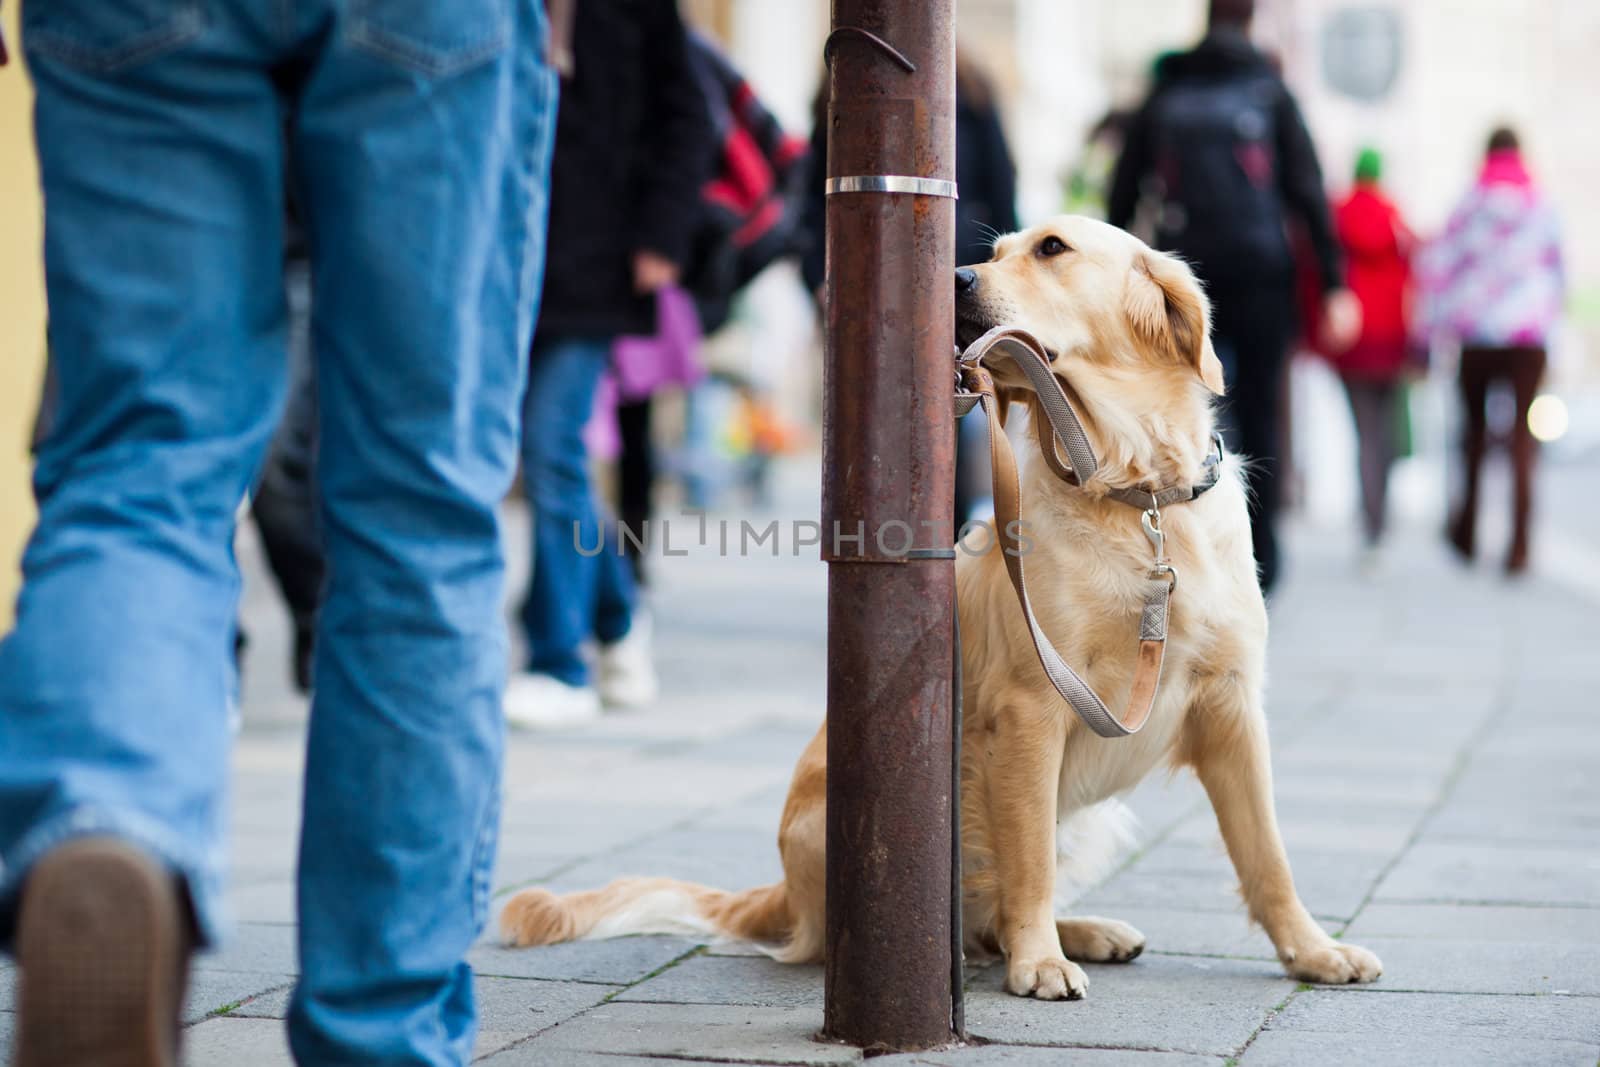 cute dog waiting patiently for his master on a city street